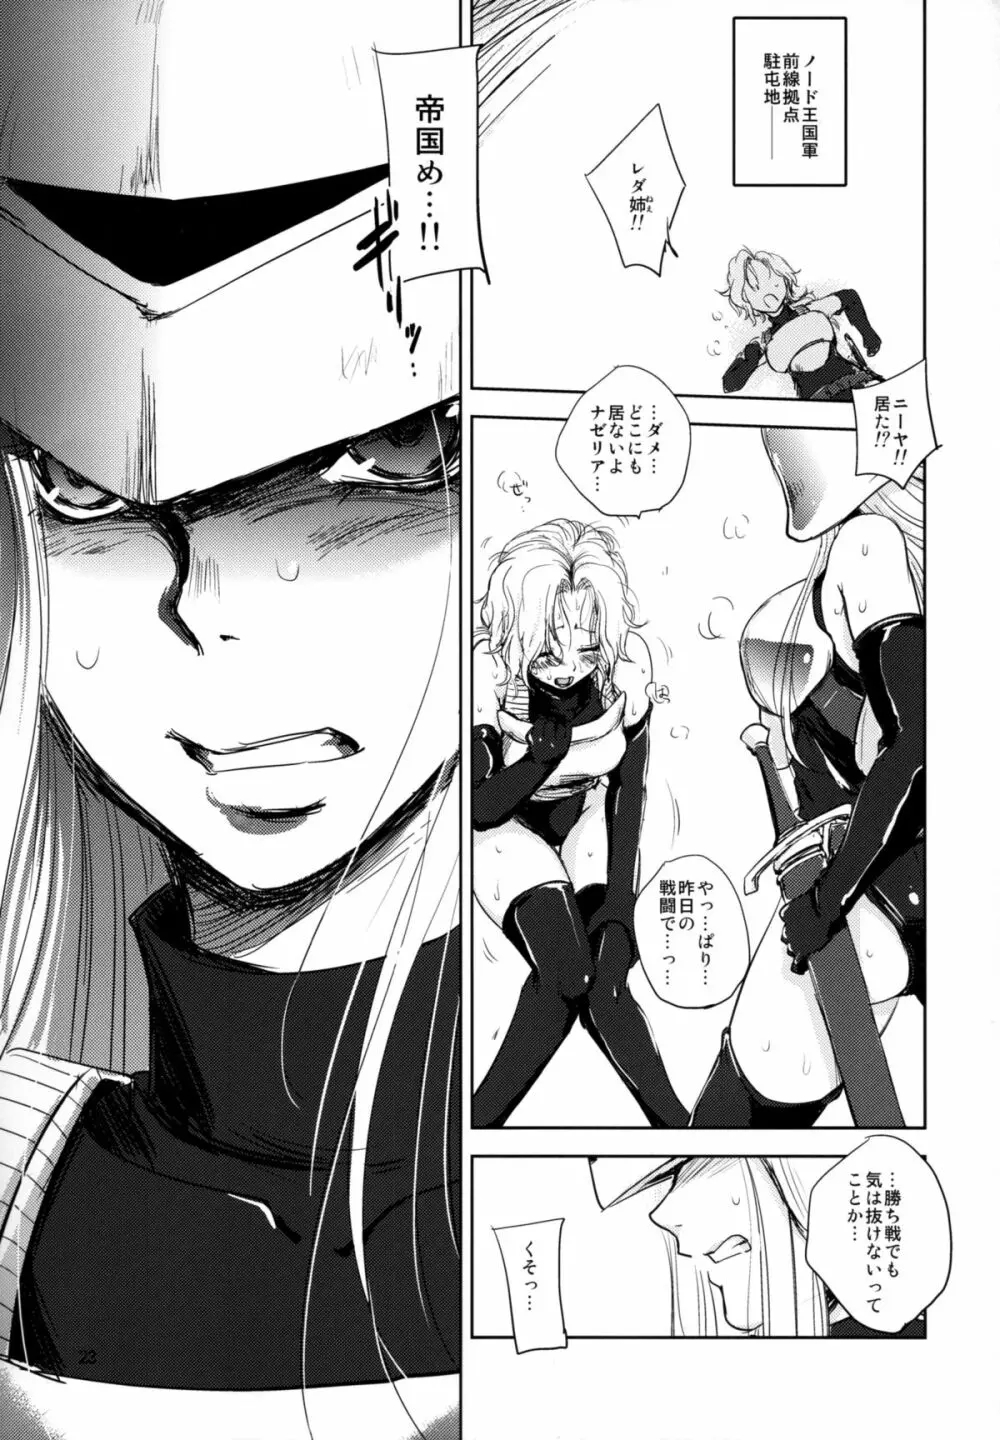 GRASSEN'S WAR ANOTHER STORY Ex #05 ノード侵攻 V Page.23